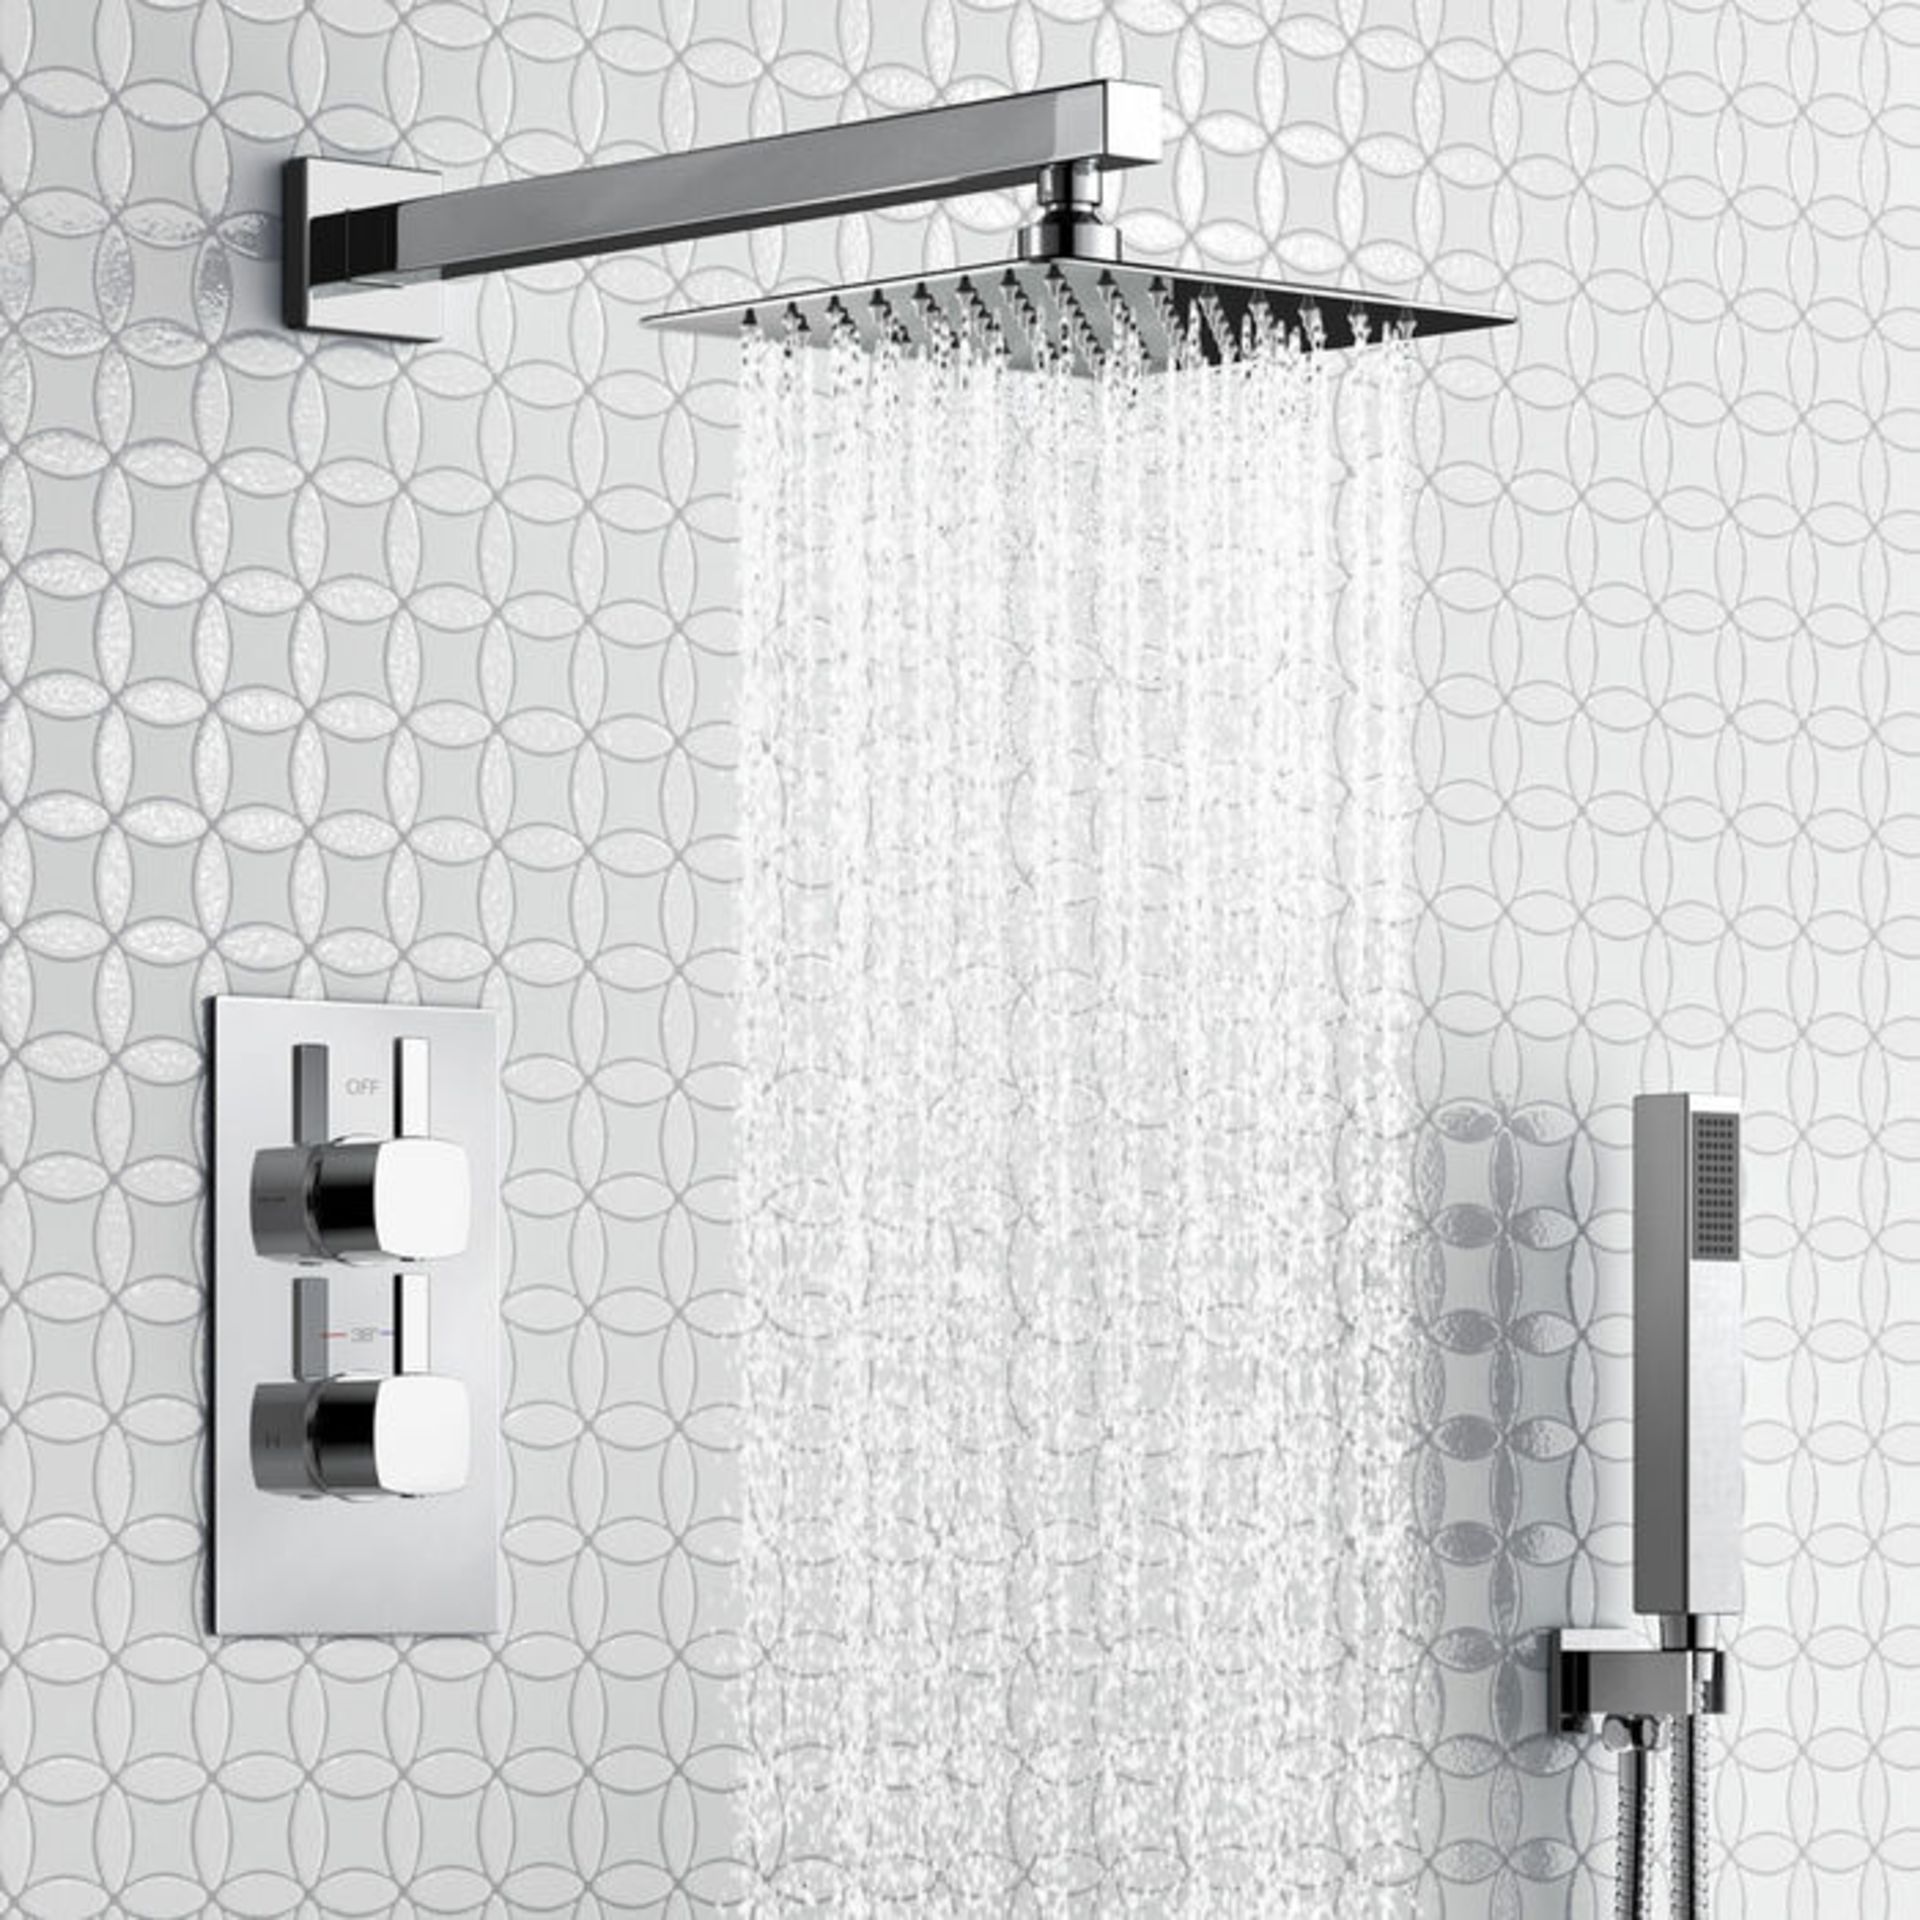 (A30) 200mm Square Stainless Steel Wall Mounted Head, Handheld & Thermostatic Mixer Shower Kit -